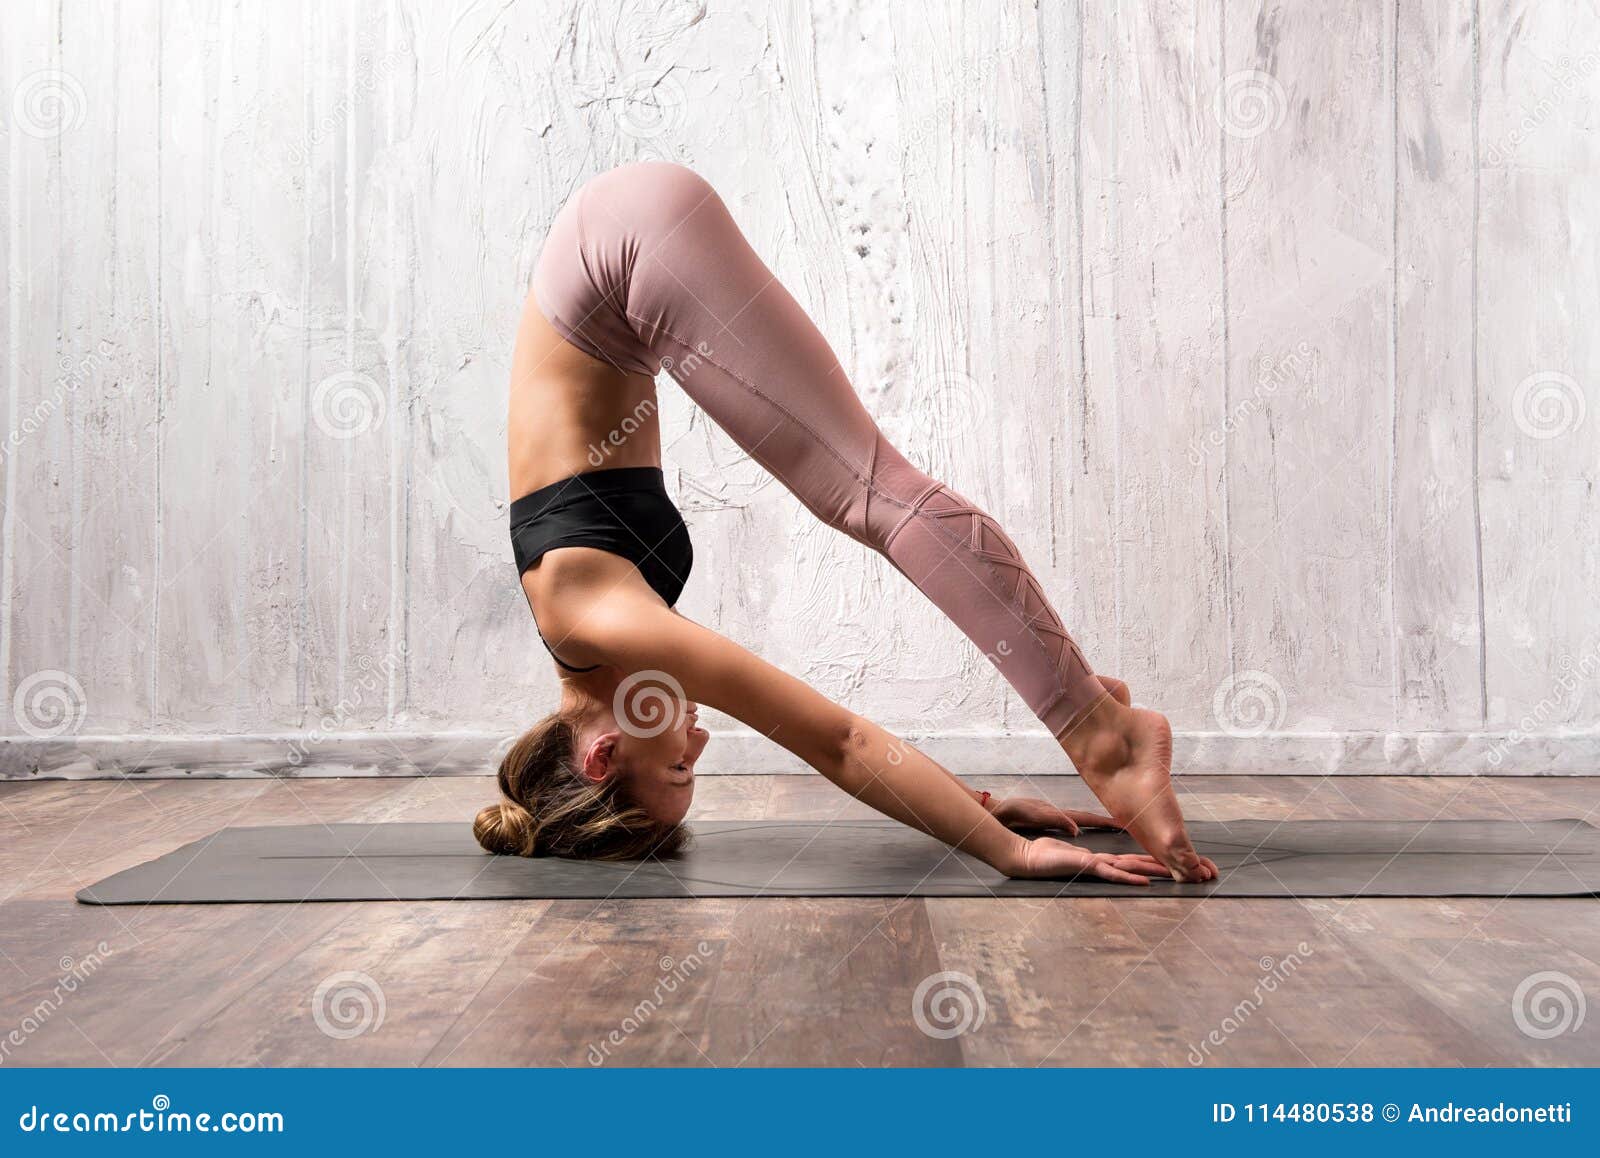 Using Props for Sirsasana - Headstand - Blog - Yogamatters